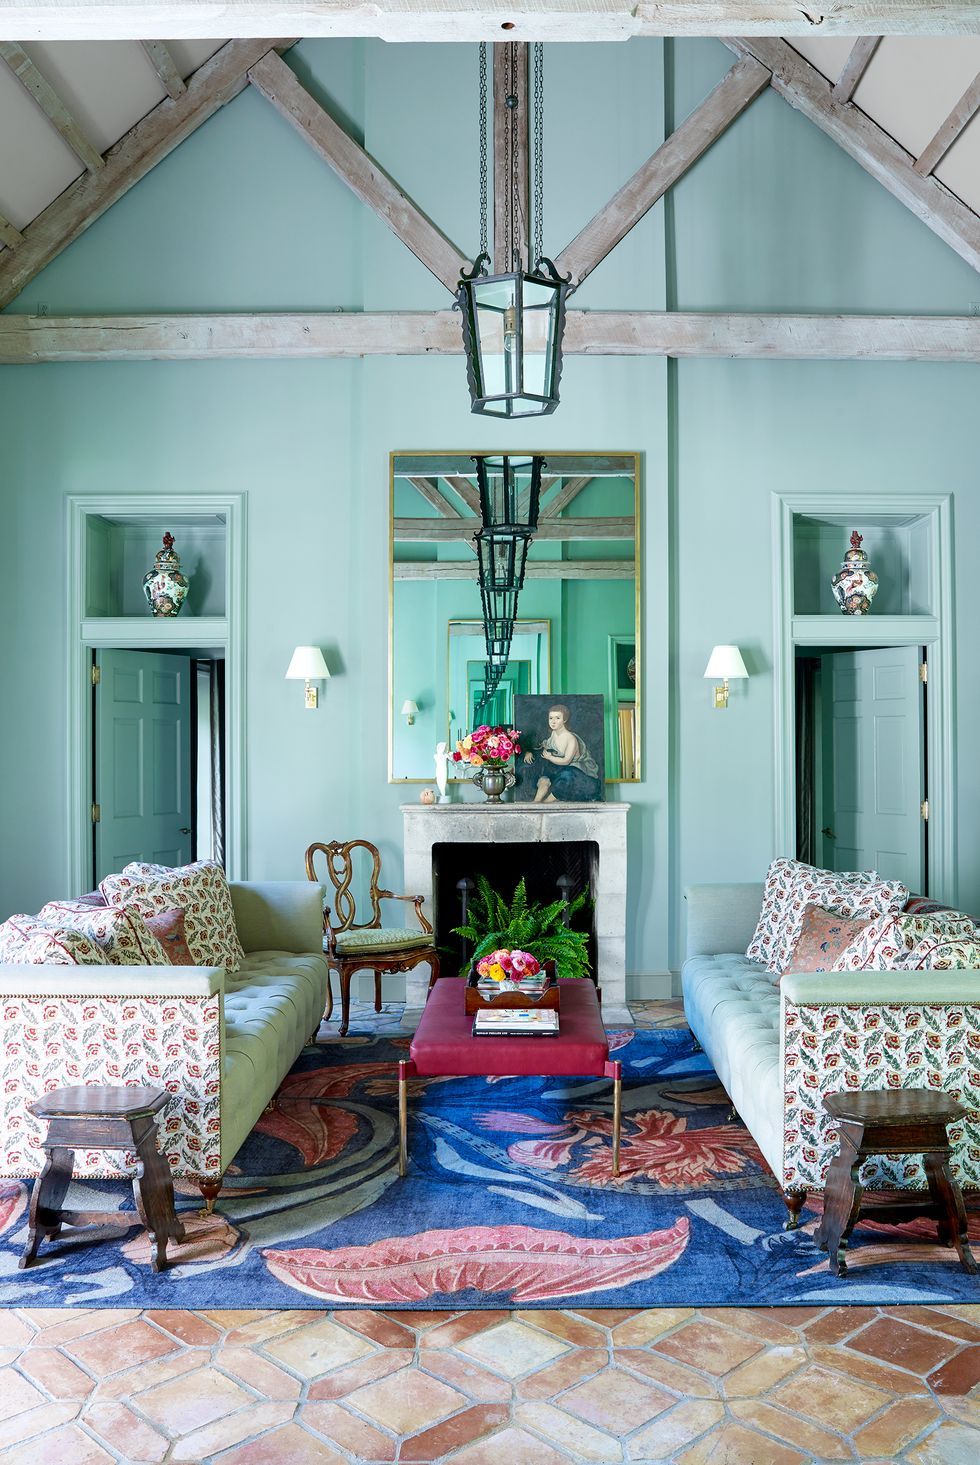 Drawing Room Colour Combination for a Stylish Makeover - Asian Paints